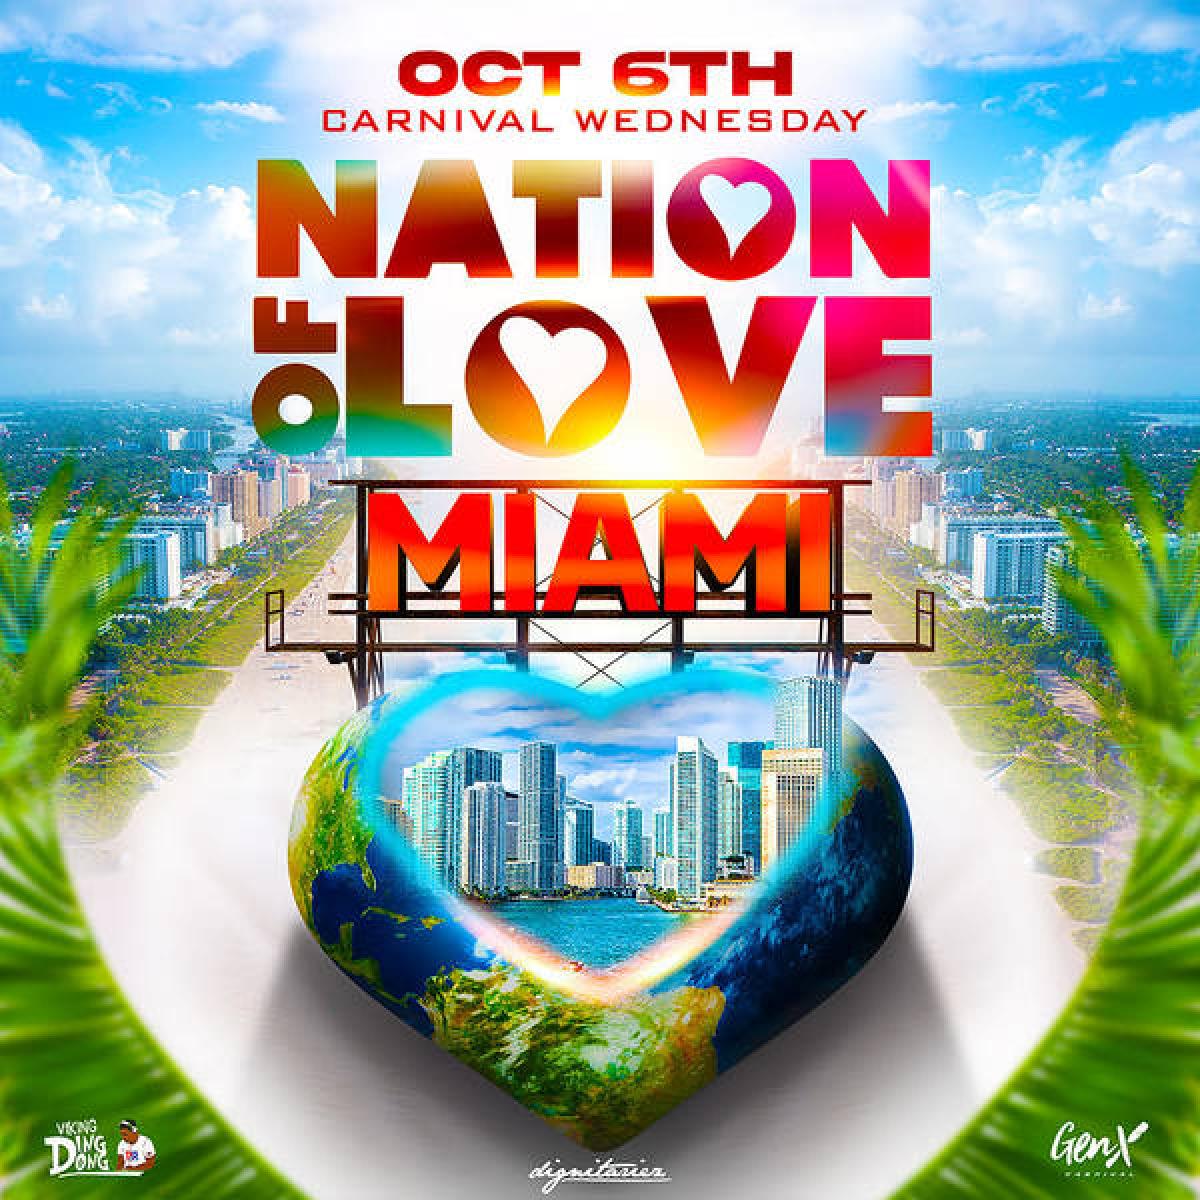 Nation of Love Miami flyer or graphic.